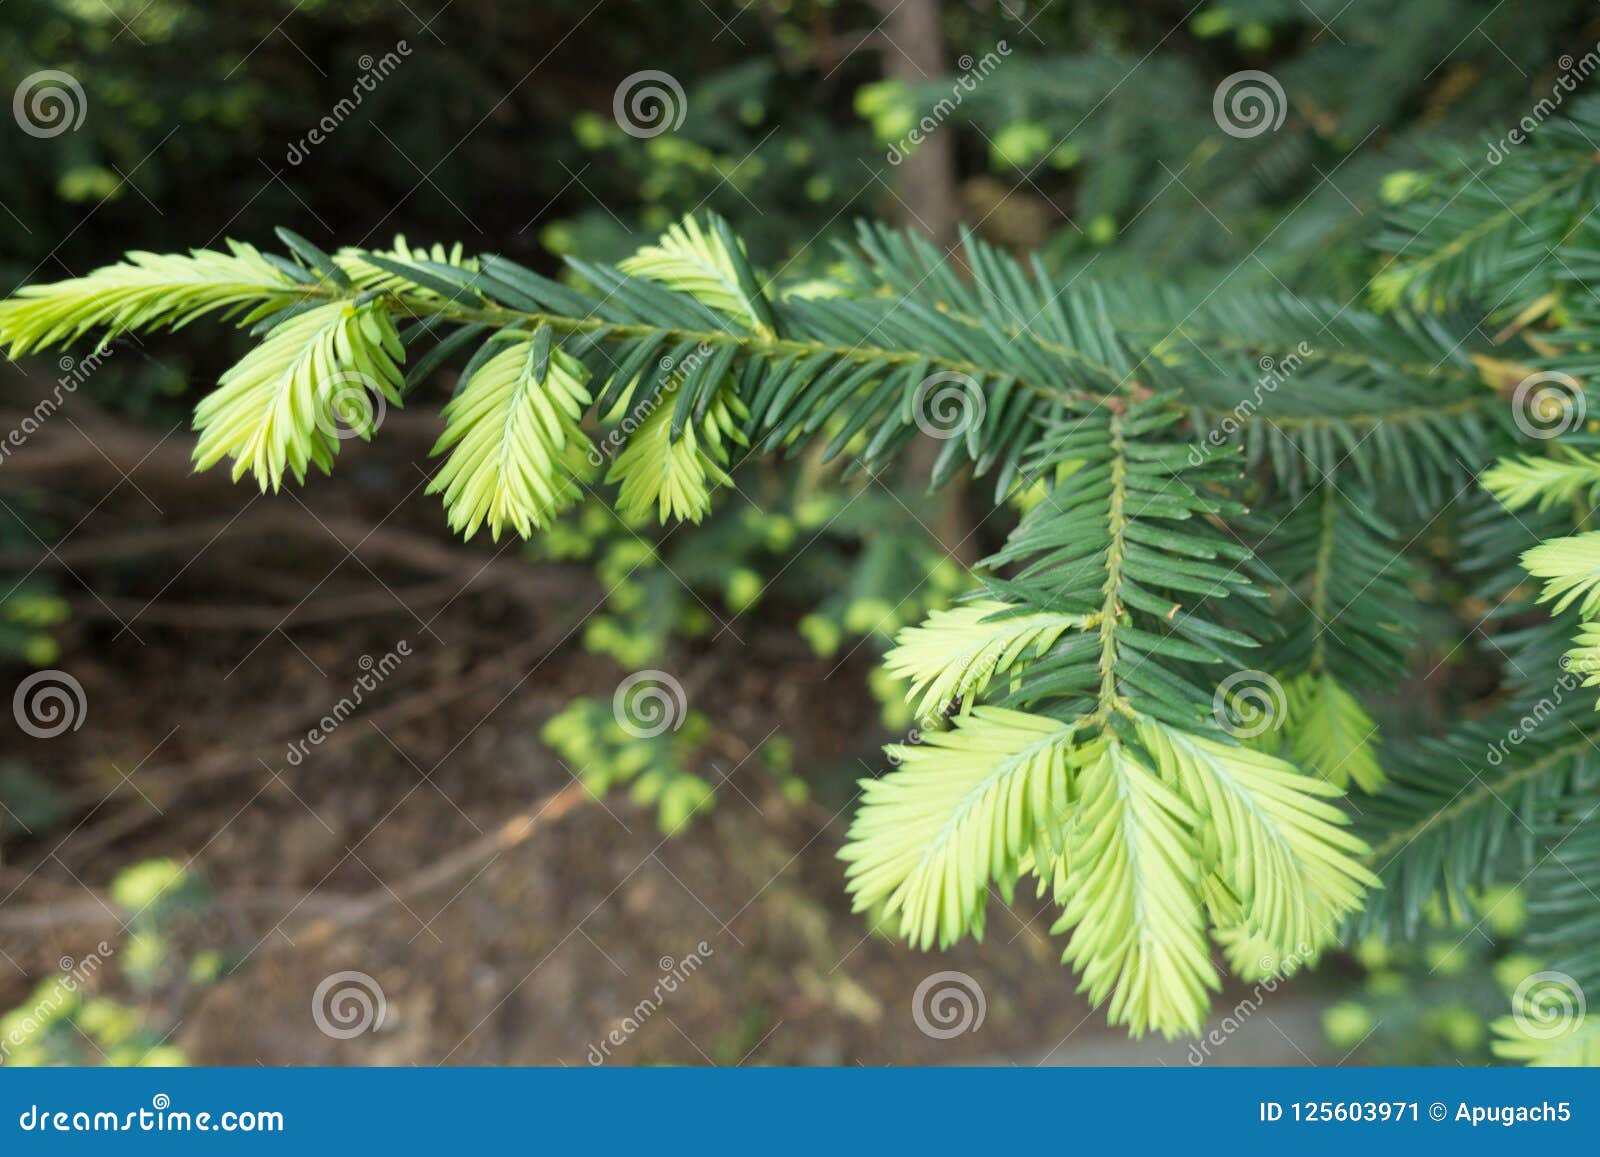 Image result for New growth on yew branches - images